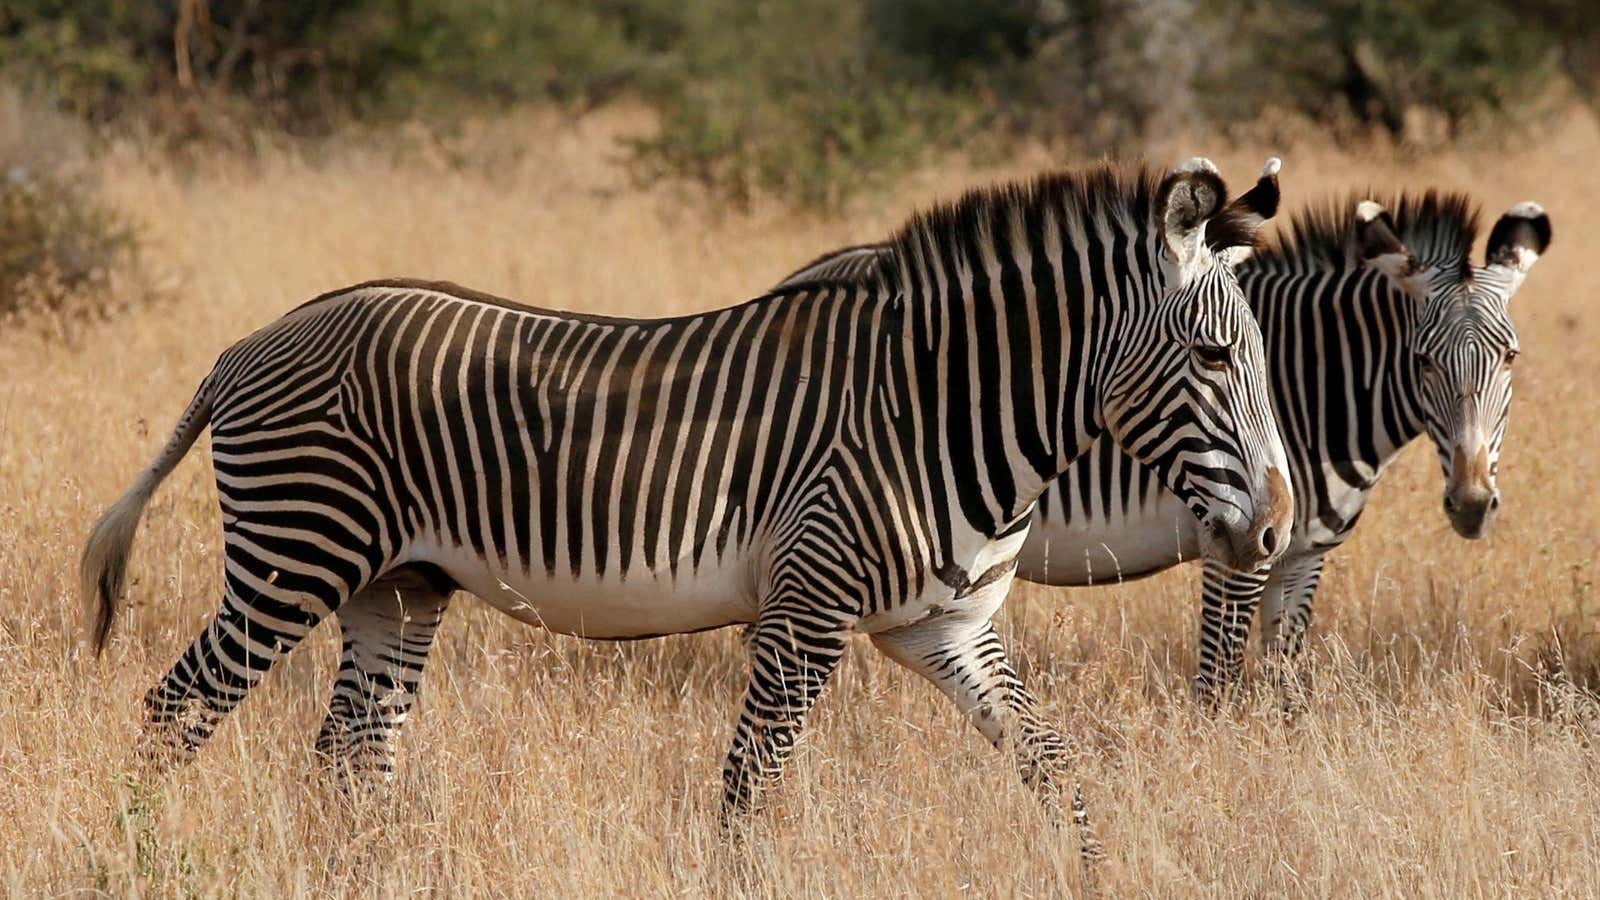 A zebra’s stripes don’t do it many favors, but at least flies don’t stand a chance.